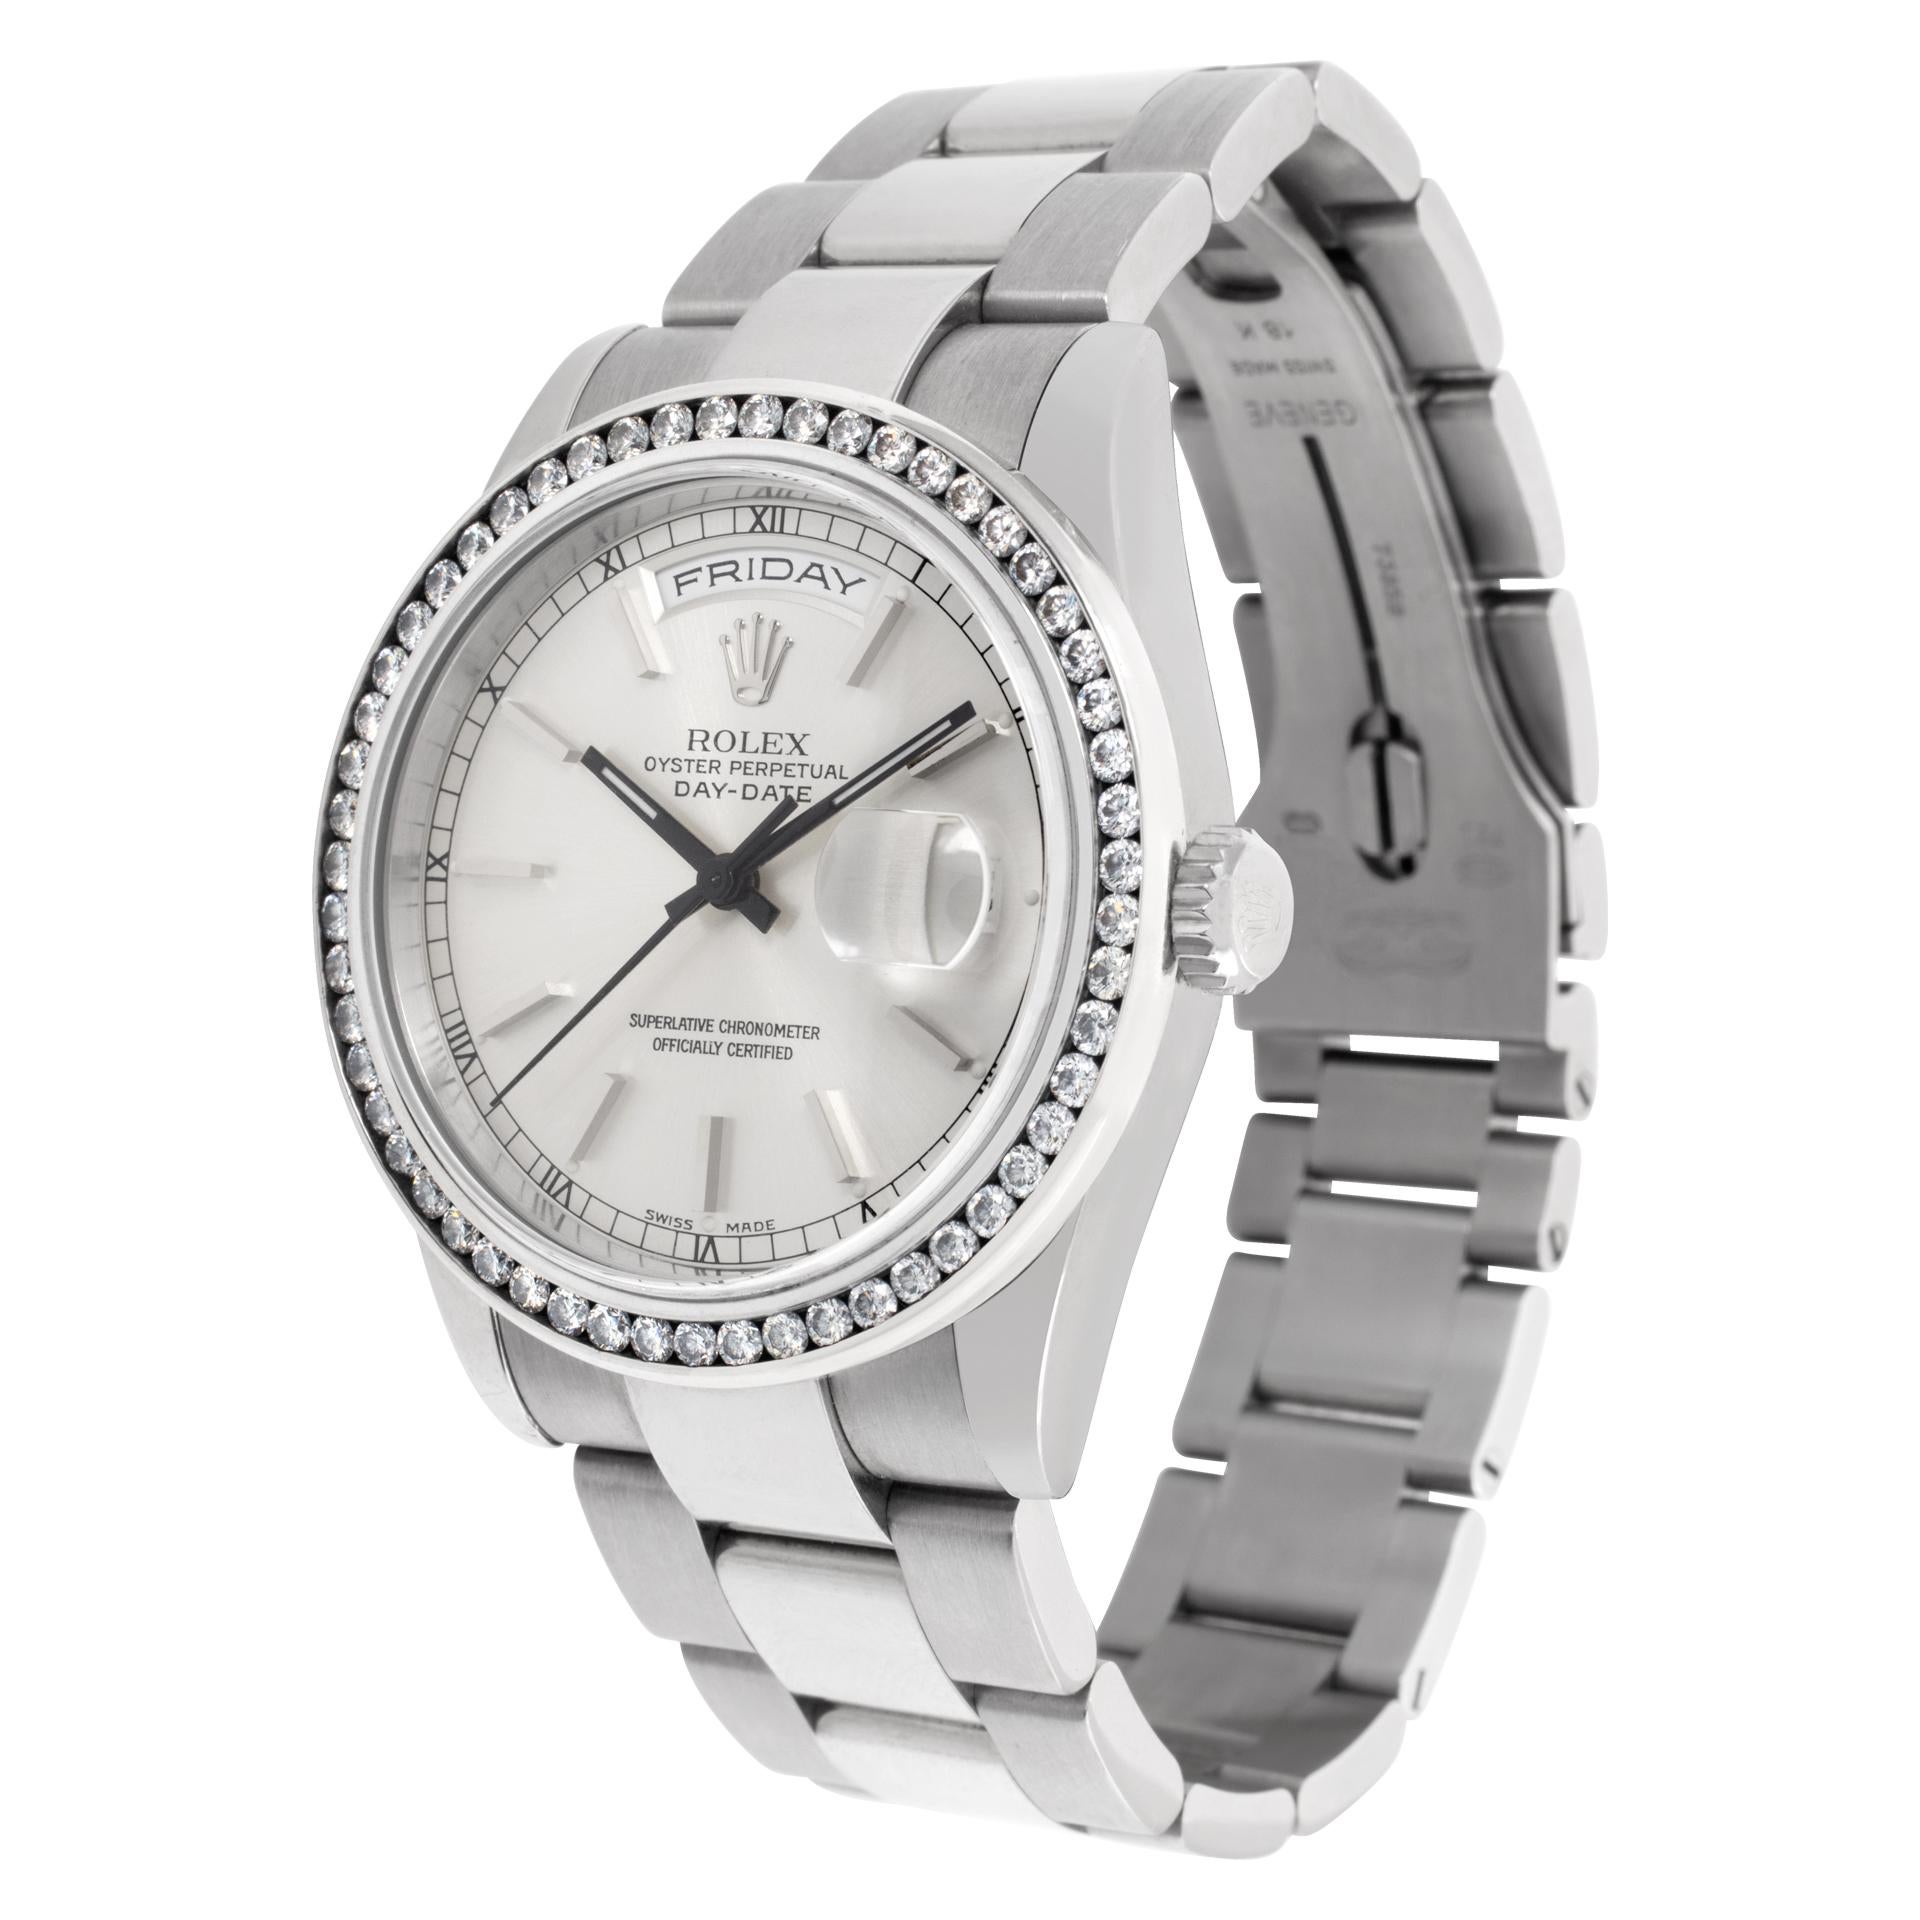 Rolex Day-Date in 18k white gold with Oyster bracelet and custom channel set diamond bezel. Auto w/ sweep seconds day and date. 36 mm case size. With original papers. Circa 2002. Ref 118209. **Bank wire only at this price** Fine Pre-owned Rolex